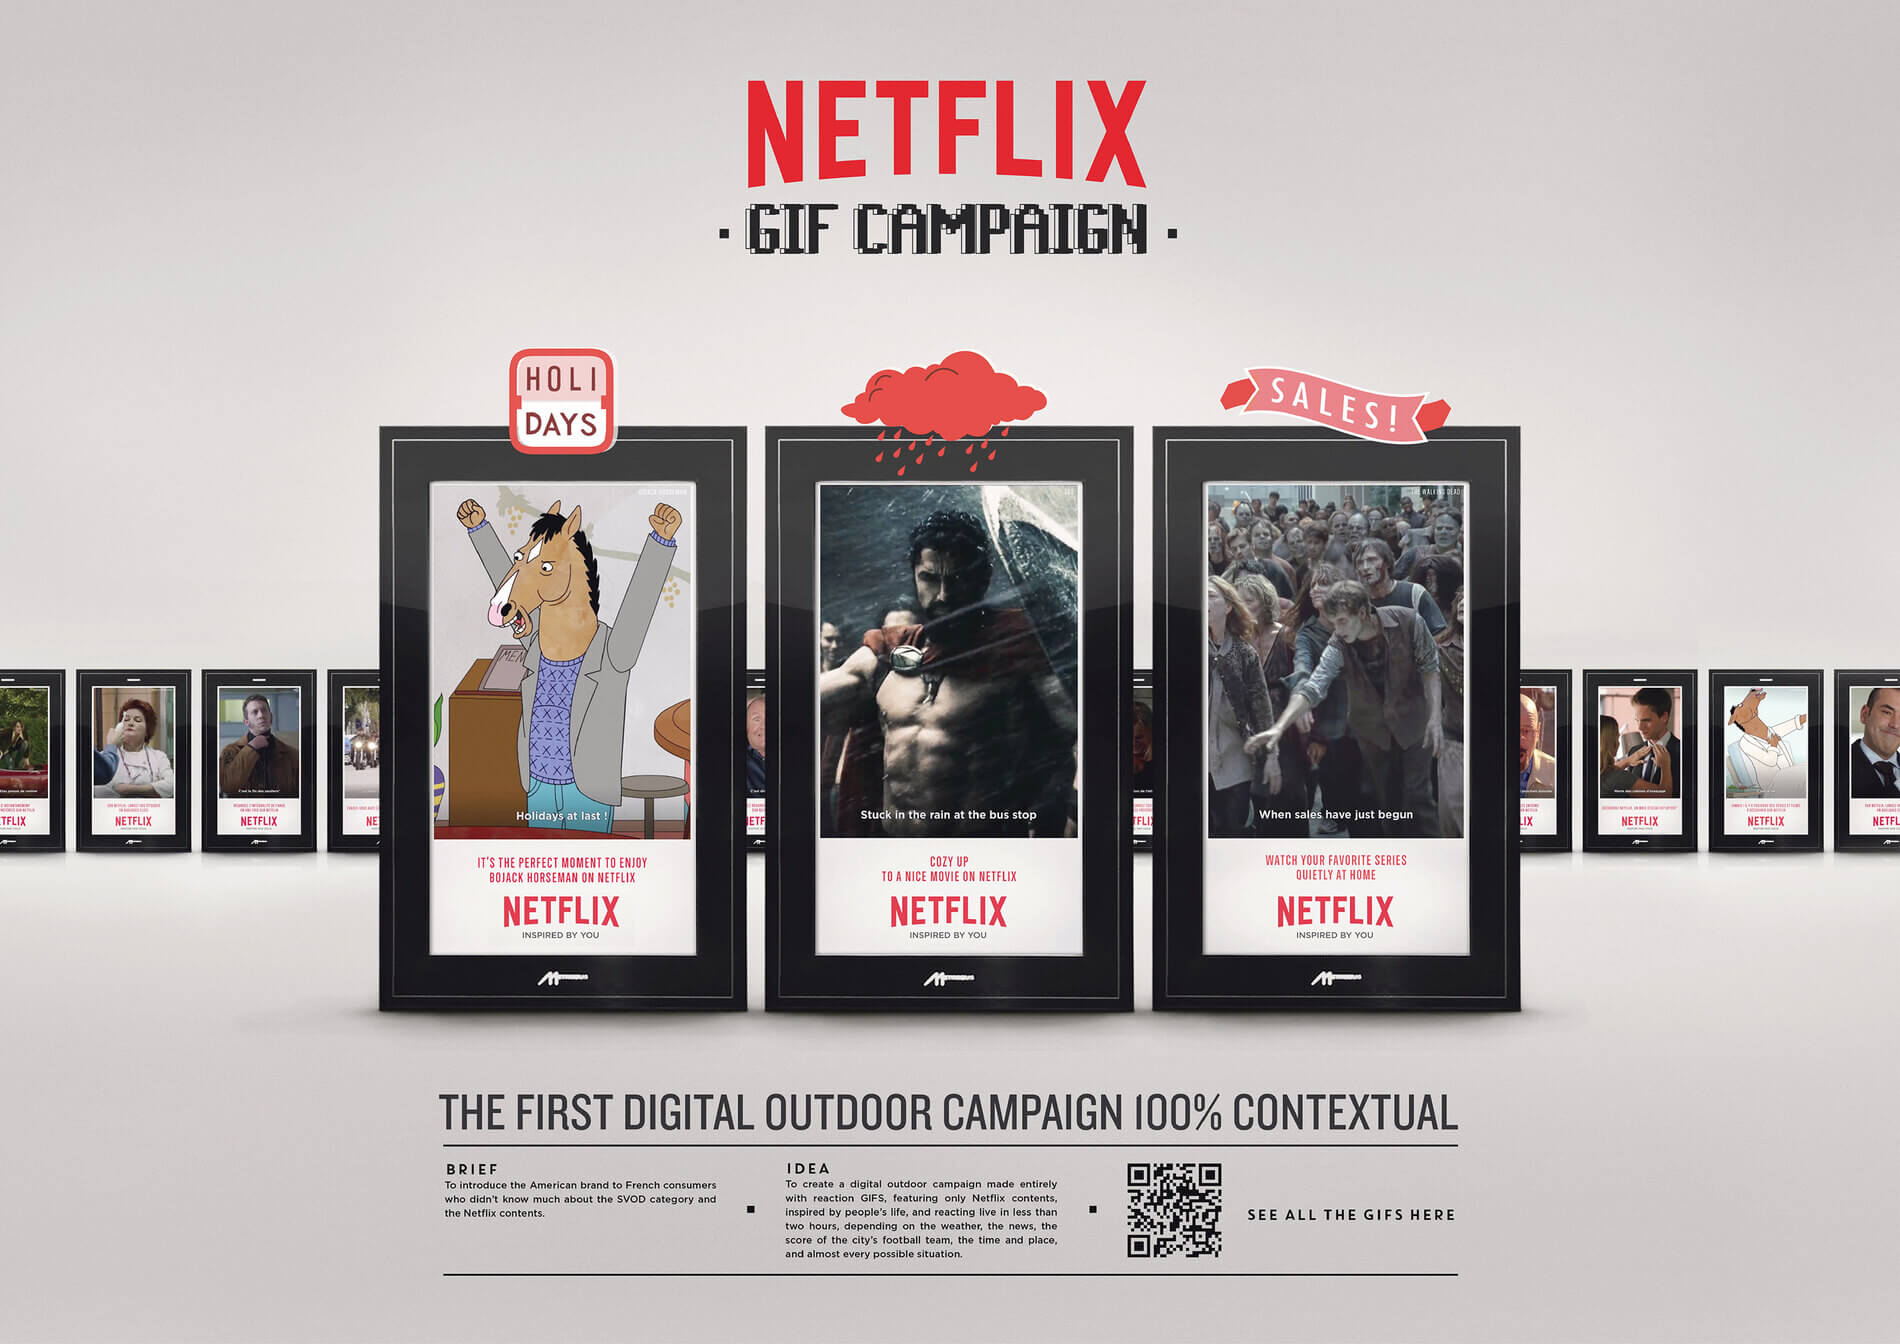 Netflix Gif Campaign Campaigns of the World®